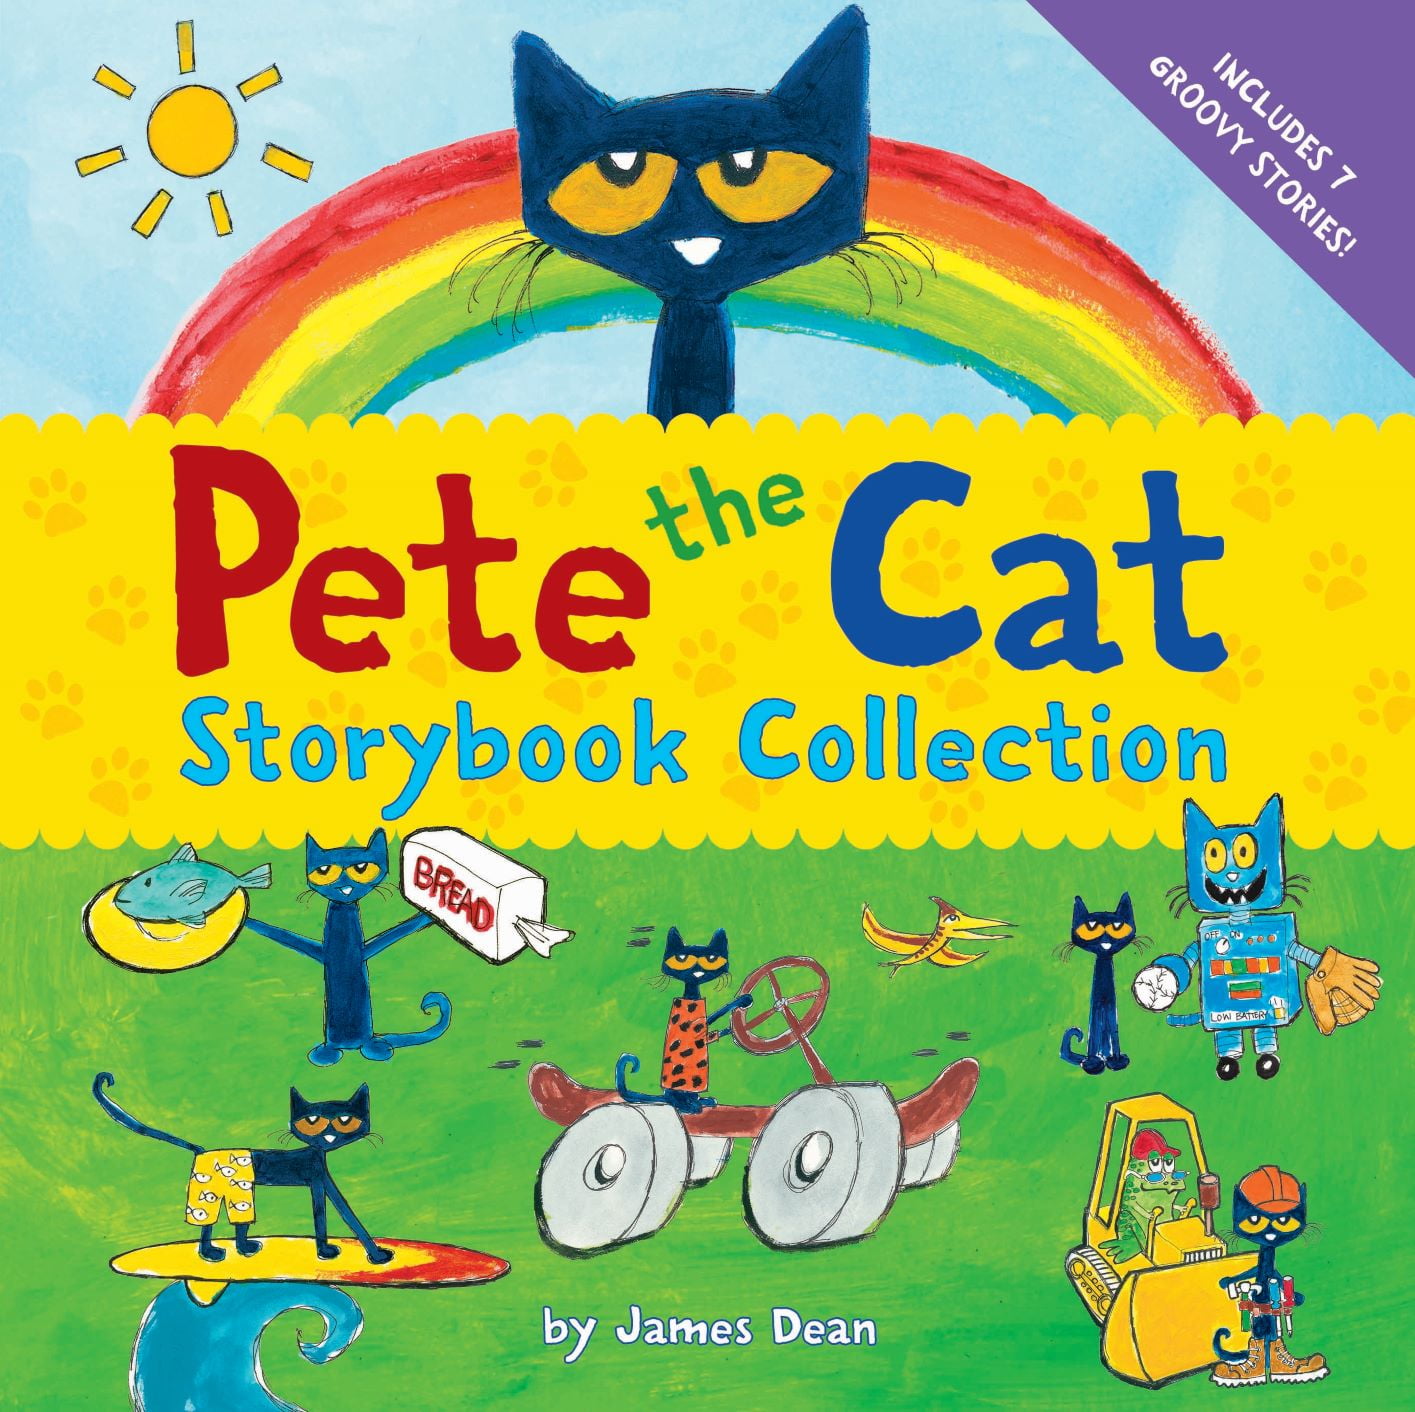 Pete the Cat Books - Browse the Complete List